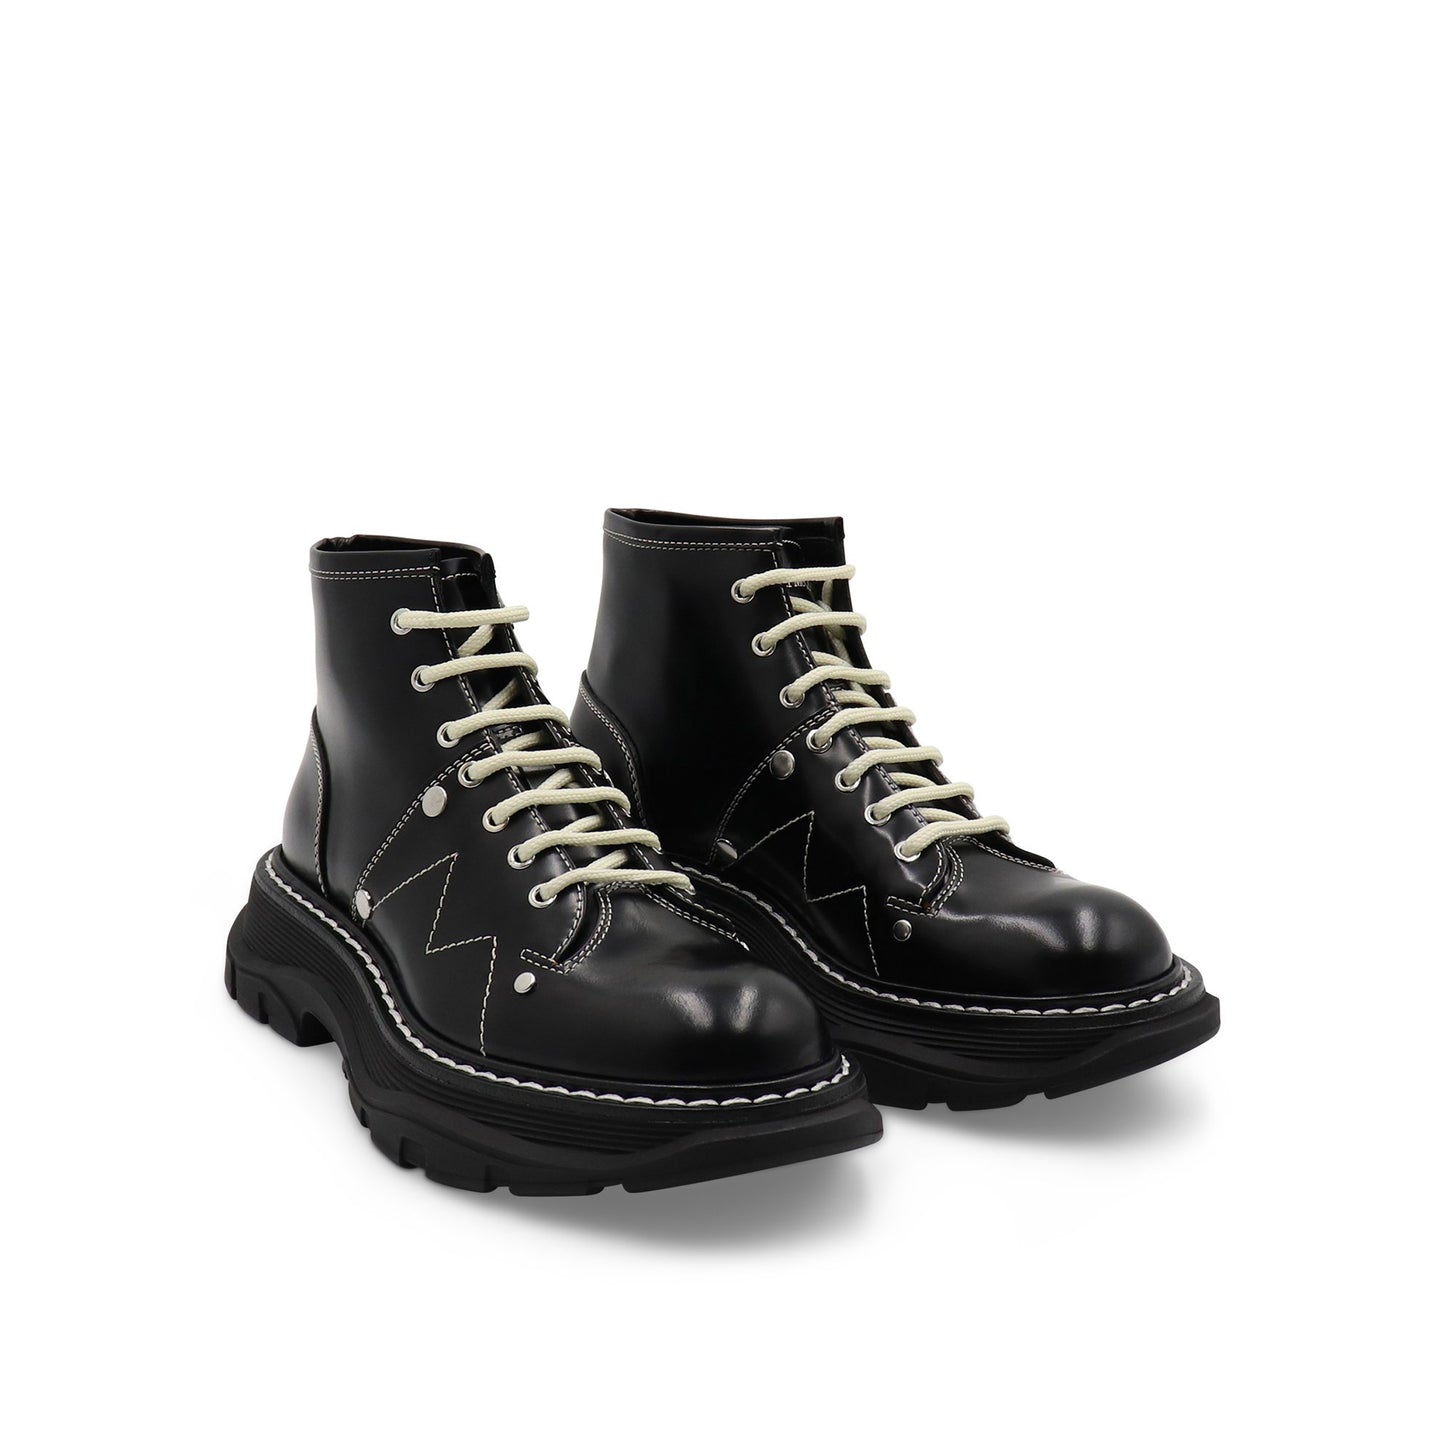 Tread Lace Up Boots in Black/Silver